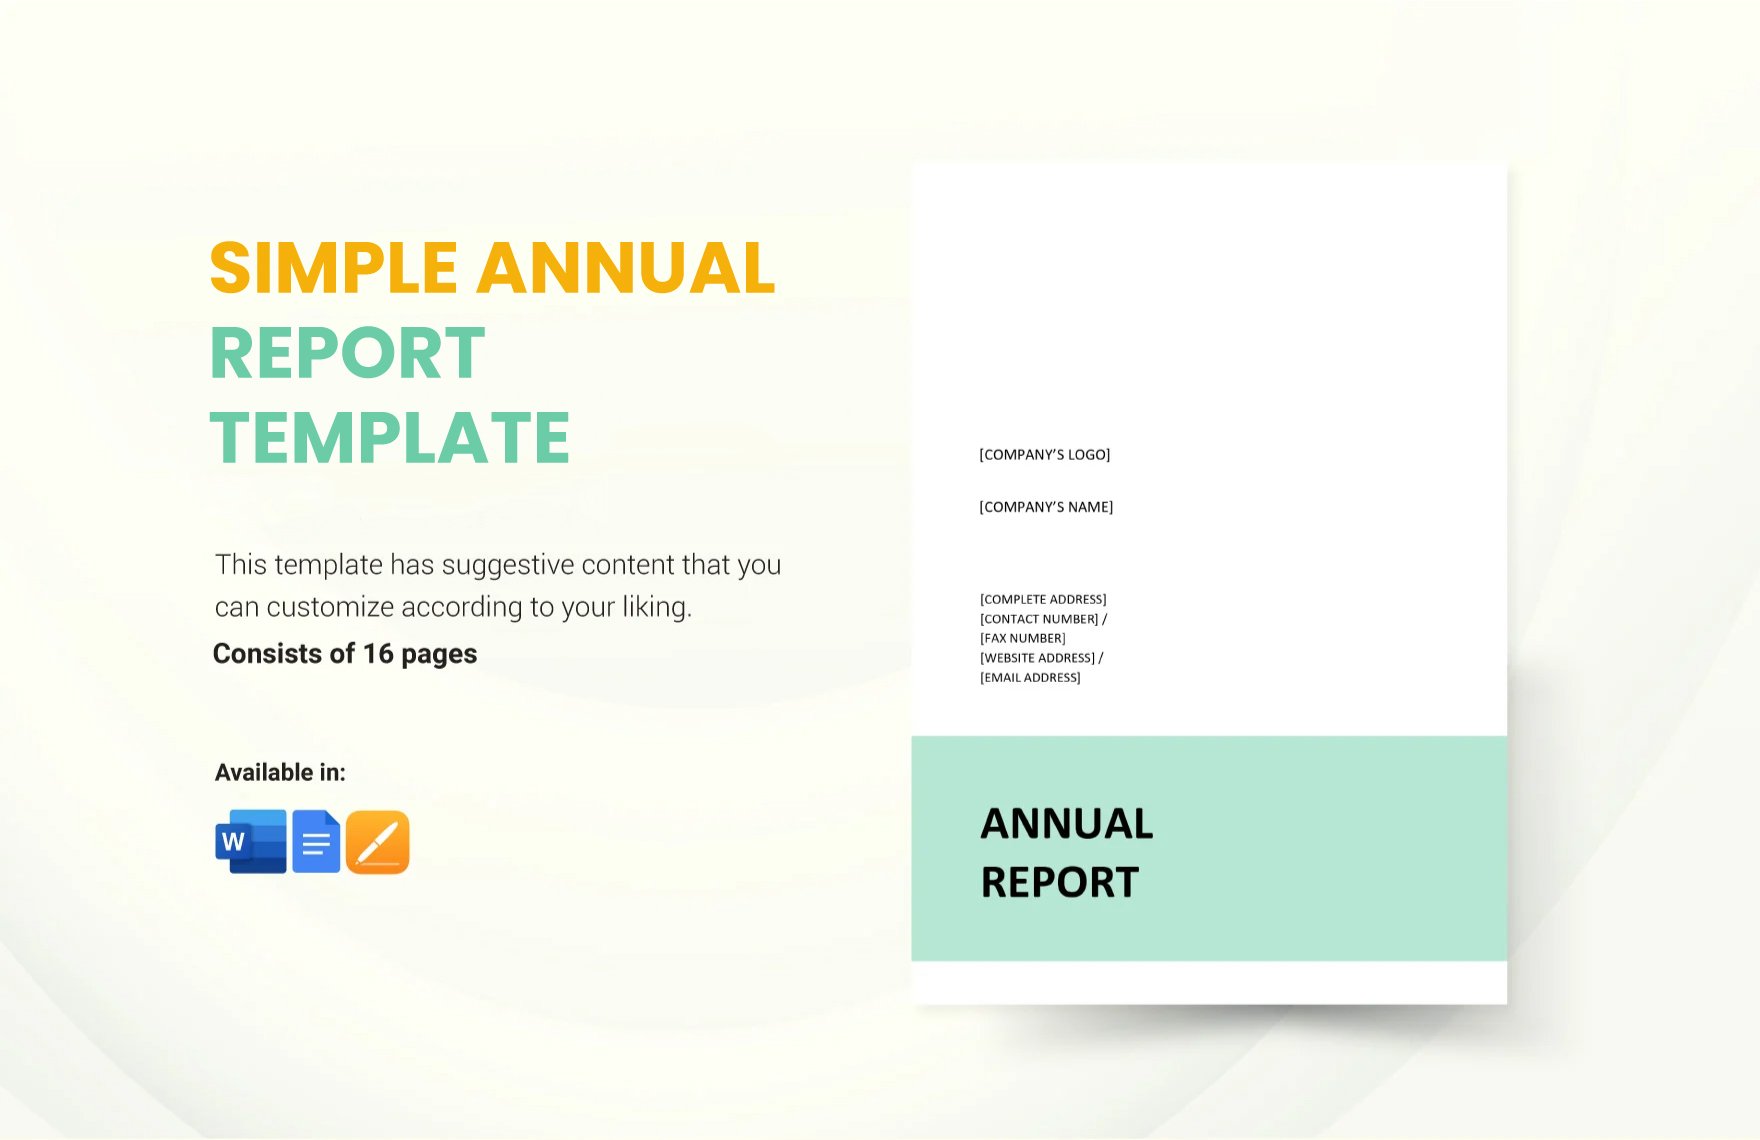 Simple Annual Report Template in Word, Google Docs, Apple Pages